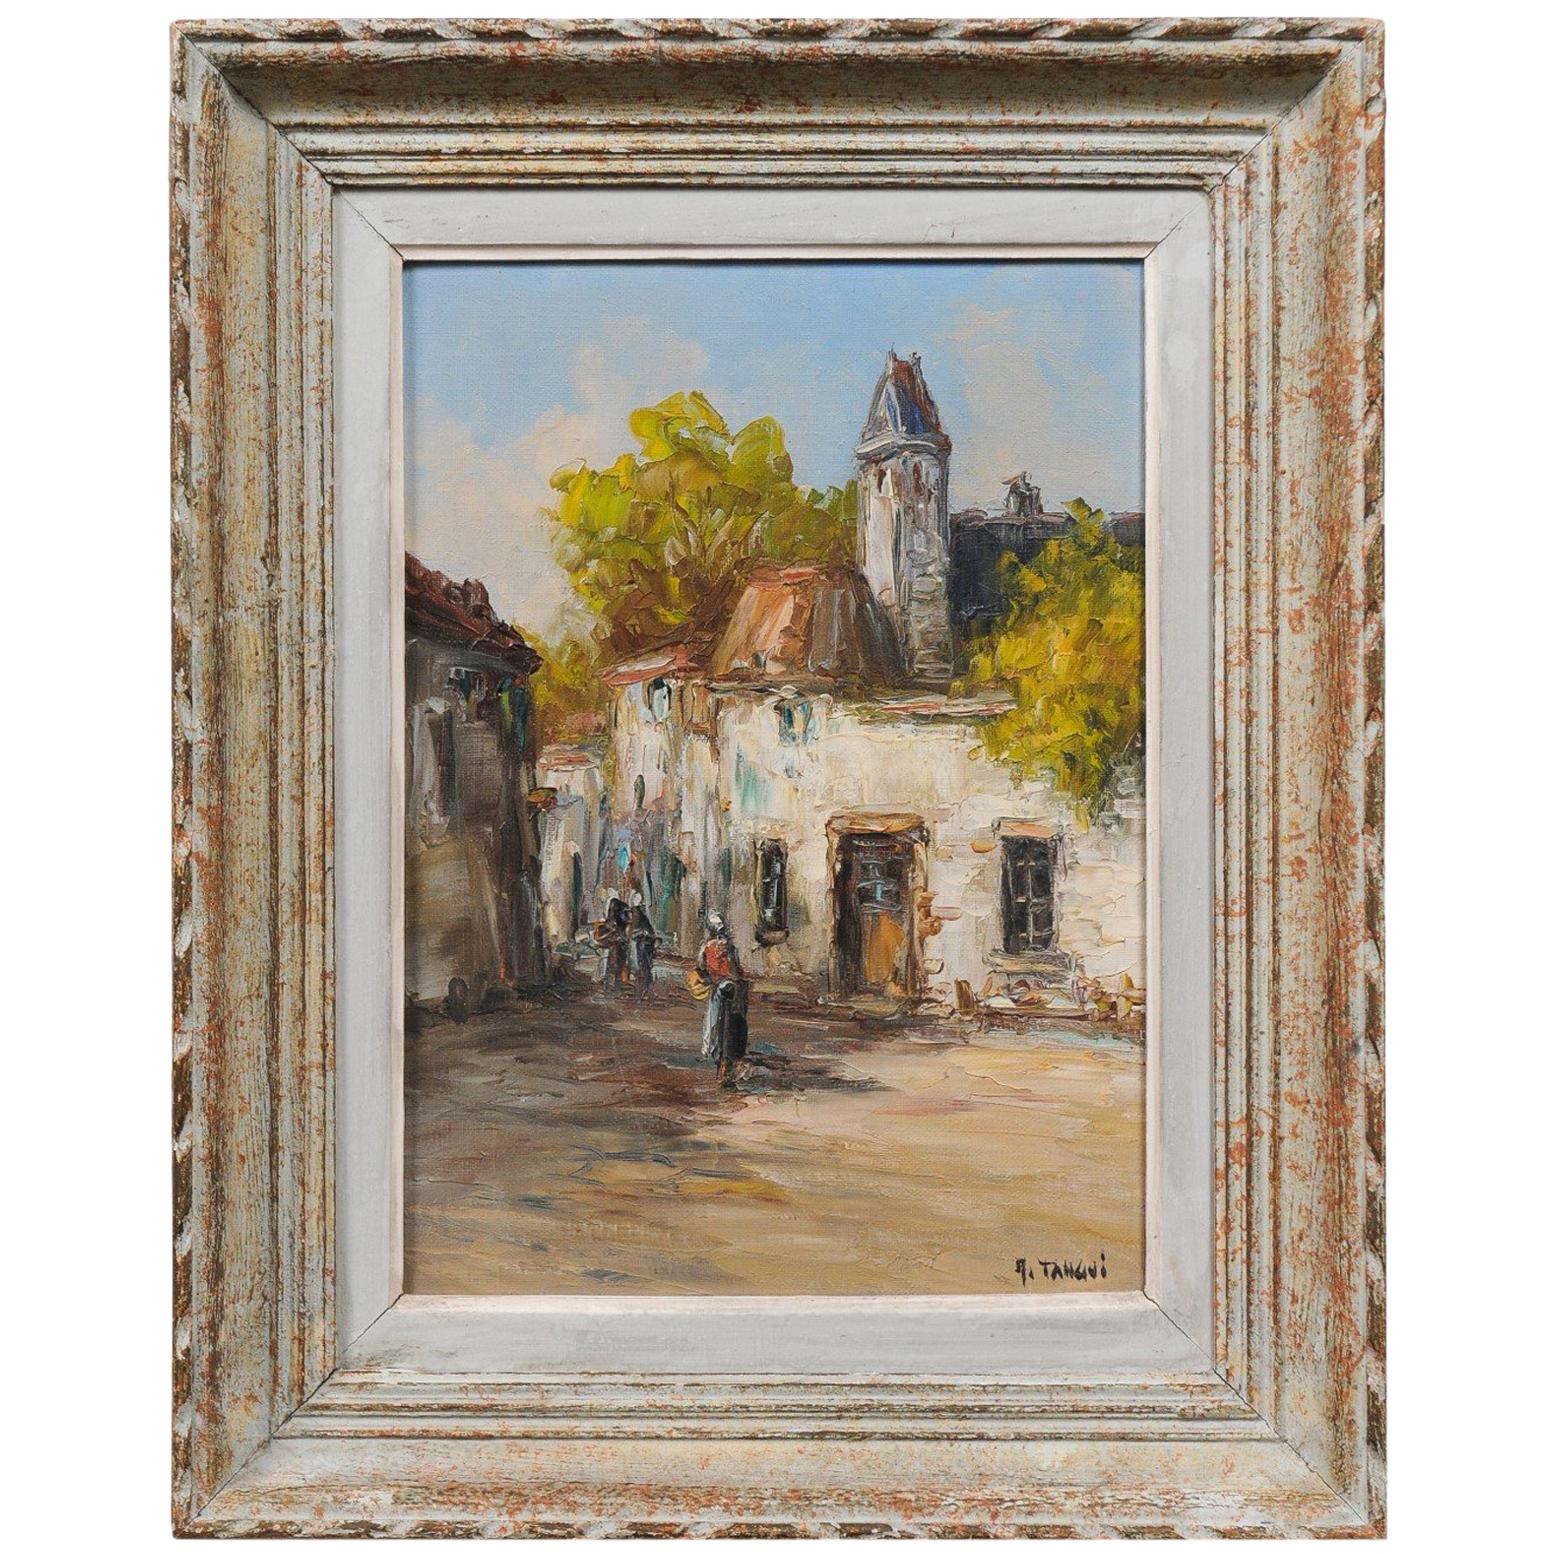 Small French 19th Century Oil on Canvas Painting Depicting a Village in Brittany